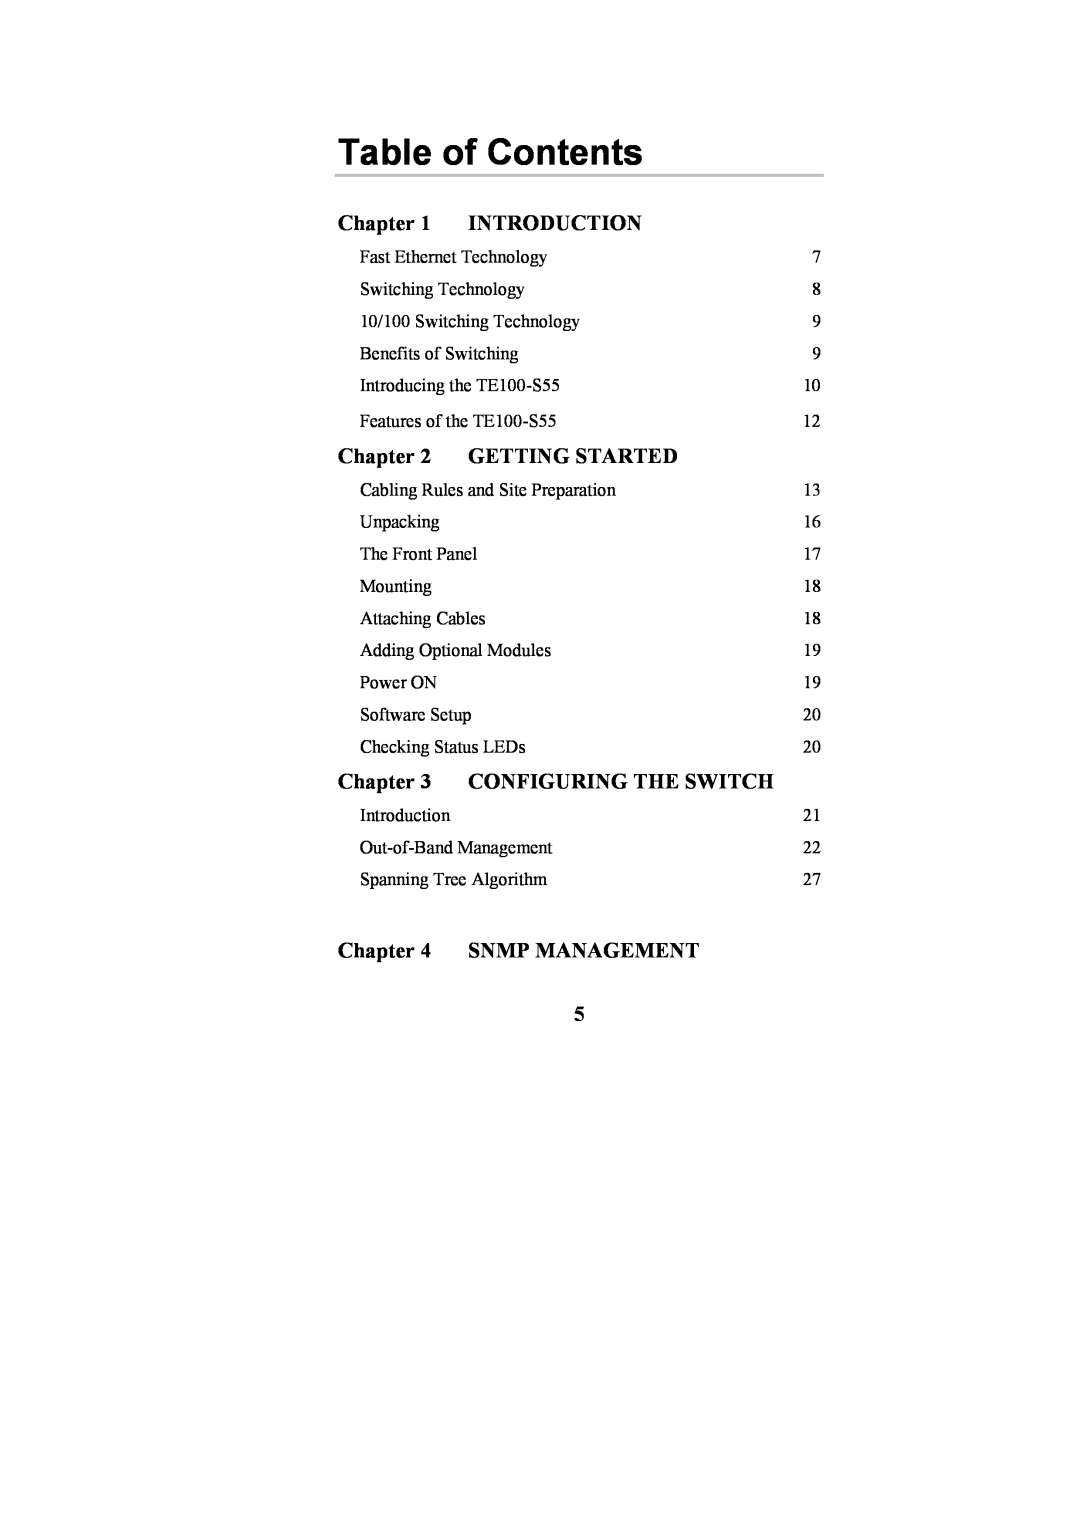 Cables to Go TE100-S55 Table of Contents, Chapter, Introduction, Getting Started, Configuring The Switch, Snmp Management 